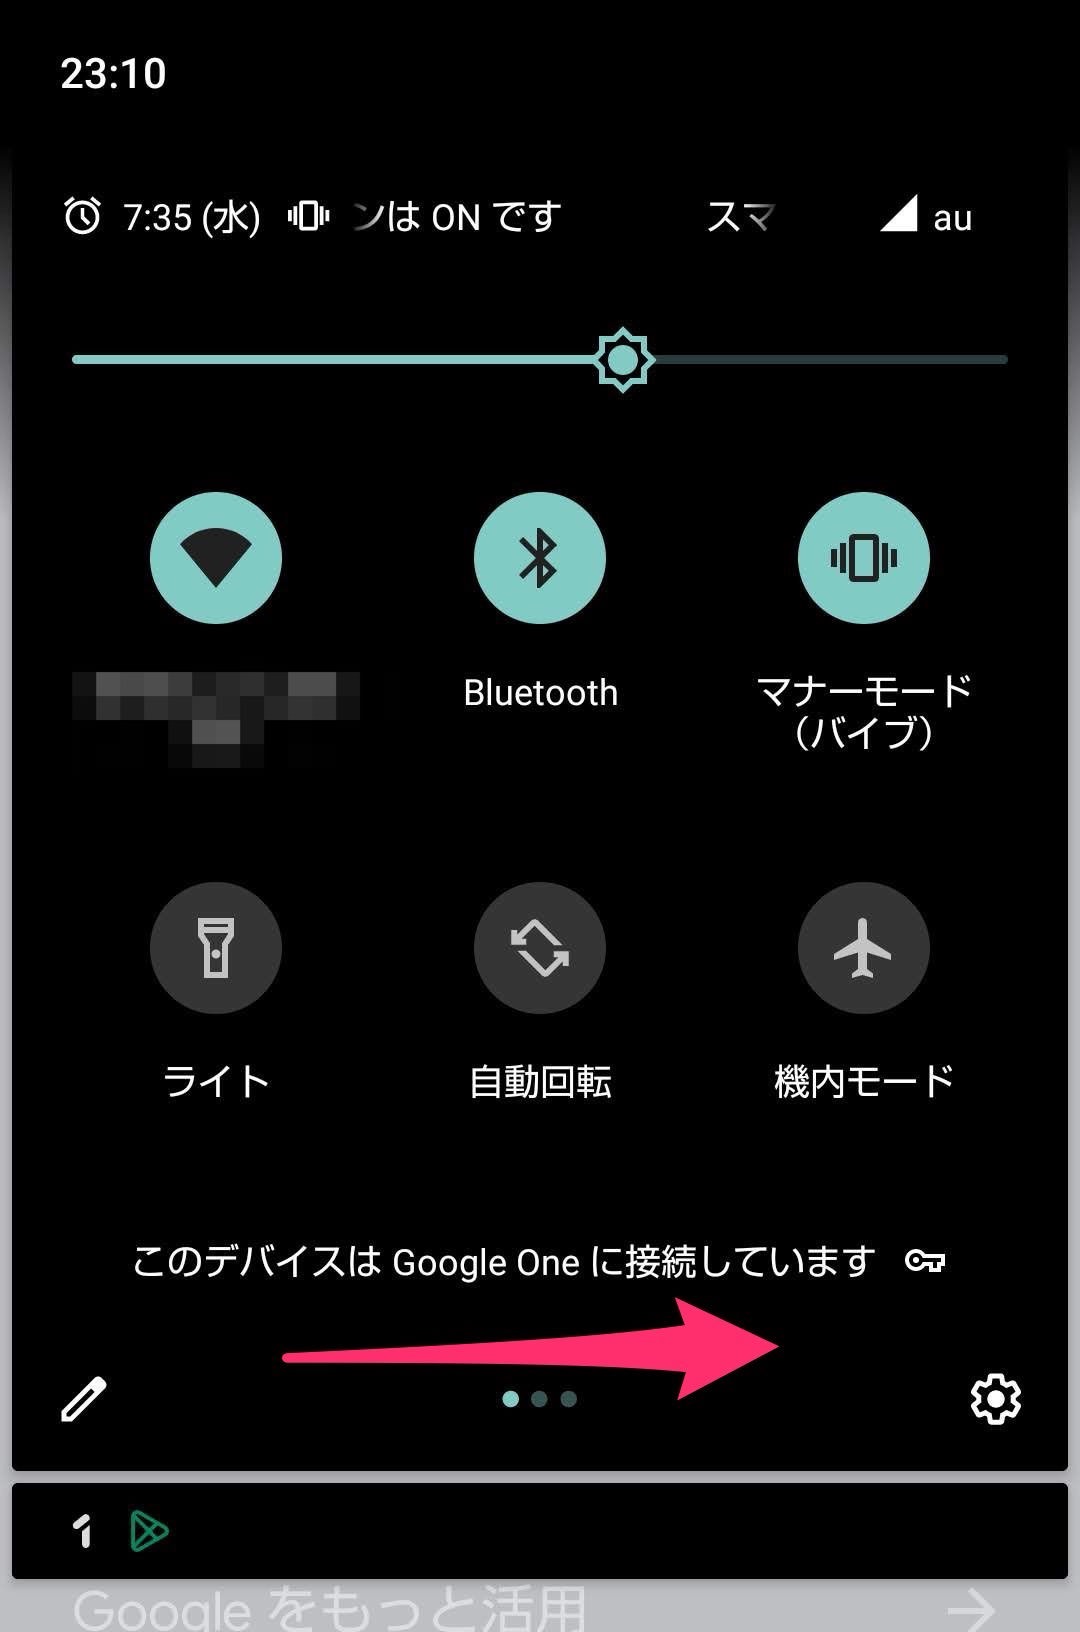 Google One VPN Android クイック設定　編集完了